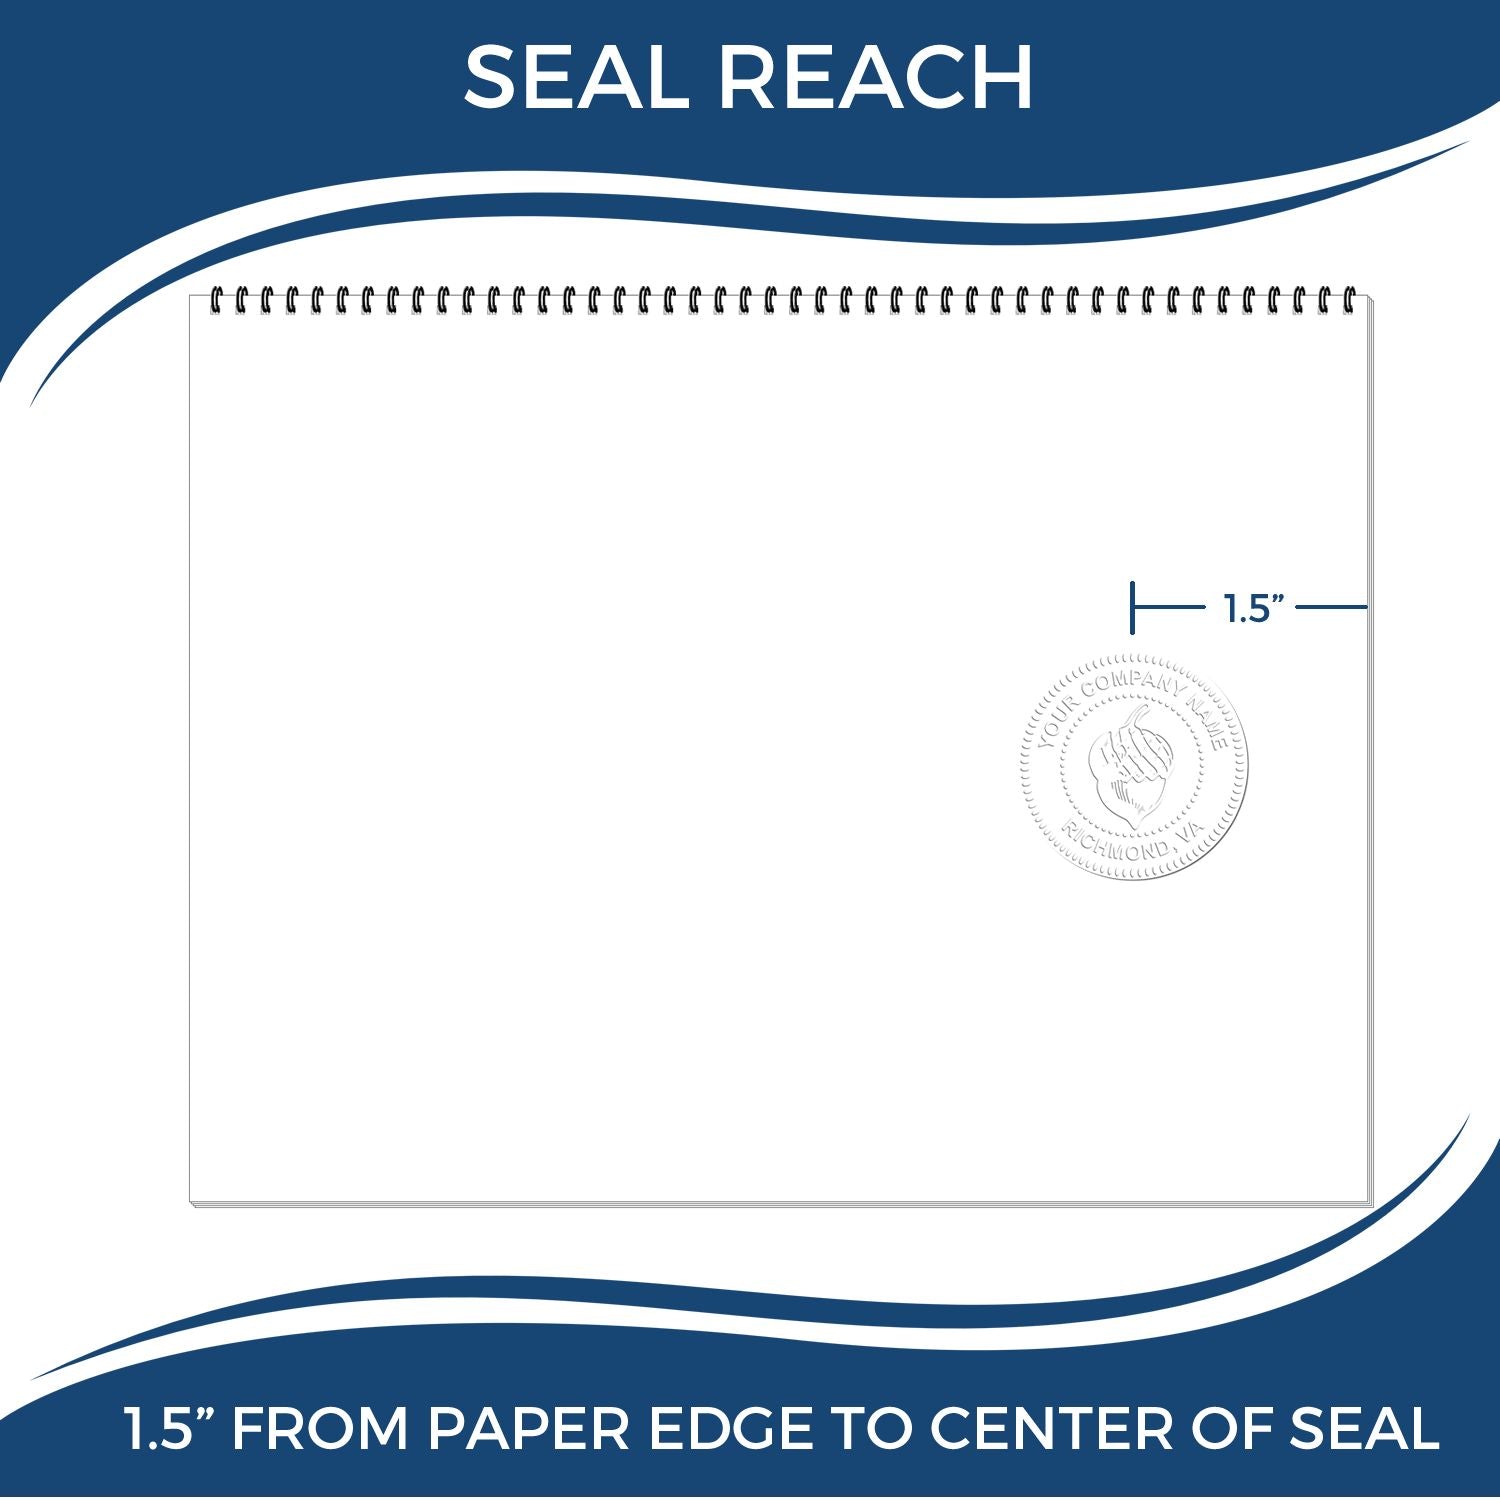 An infographic showing the seal reach which is represented by a ruler and a miniature seal image of the North Dakota Desk Surveyor Seal Embosser